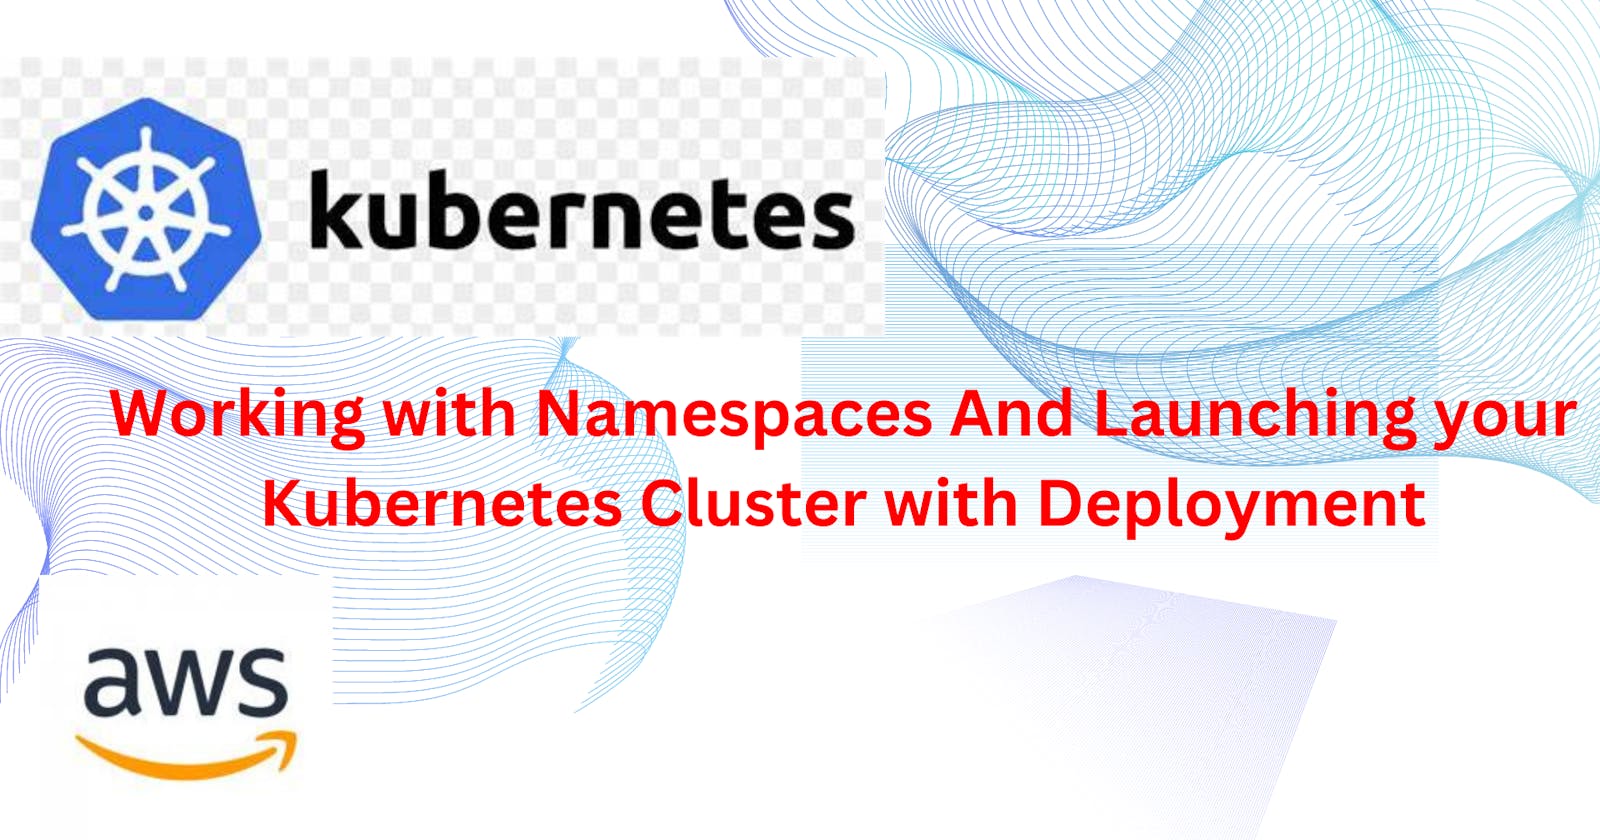 Working with Namespaces And Launching your Kubernetes Cluster with Deployment